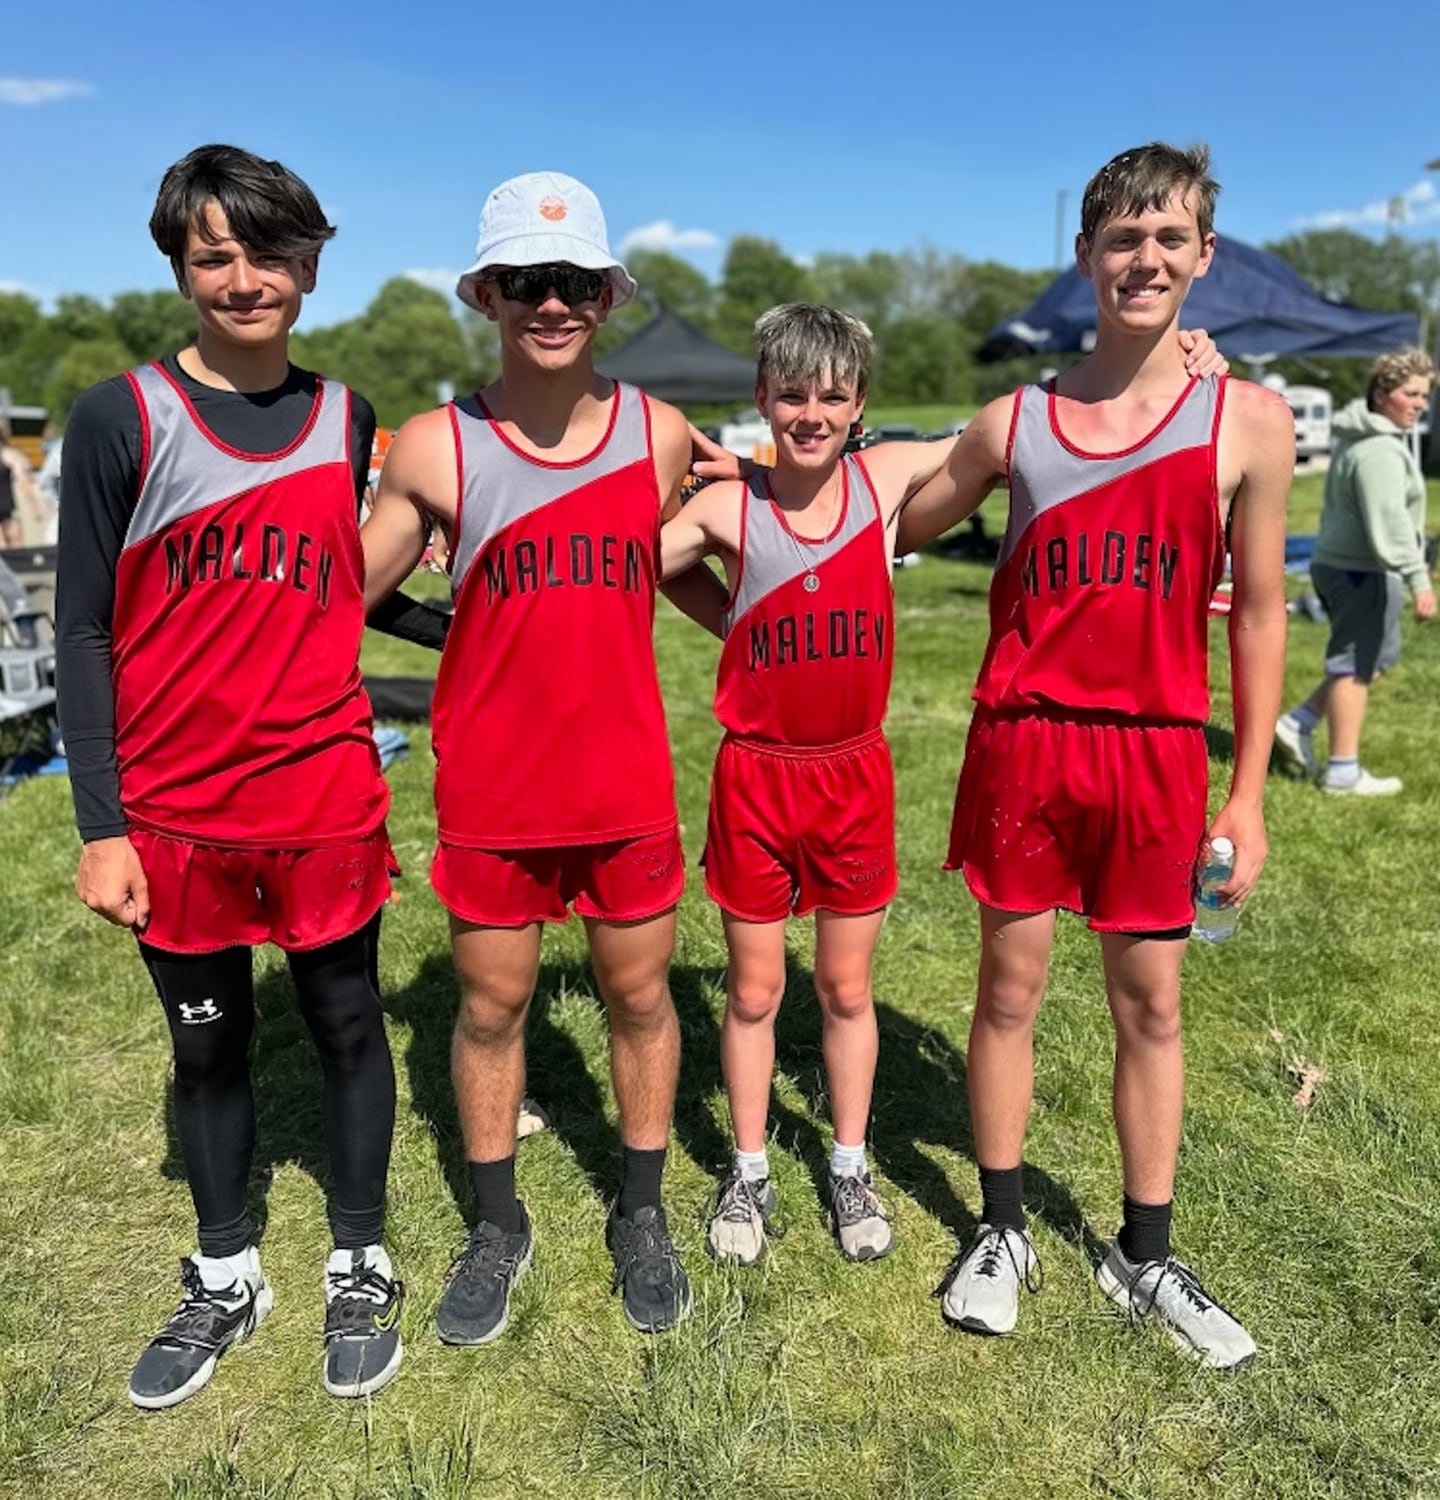 Malden Grade School qualified four athletes for the IESA State Track and Field Meet. They are from left to right: Joseph Perez (100, 4 x400, long jump), Lane Goskusky (4 x 400, shot) Brady Peach- (1600, 4 x 400) and Carter Rossler (4 x 400, shot, discus).